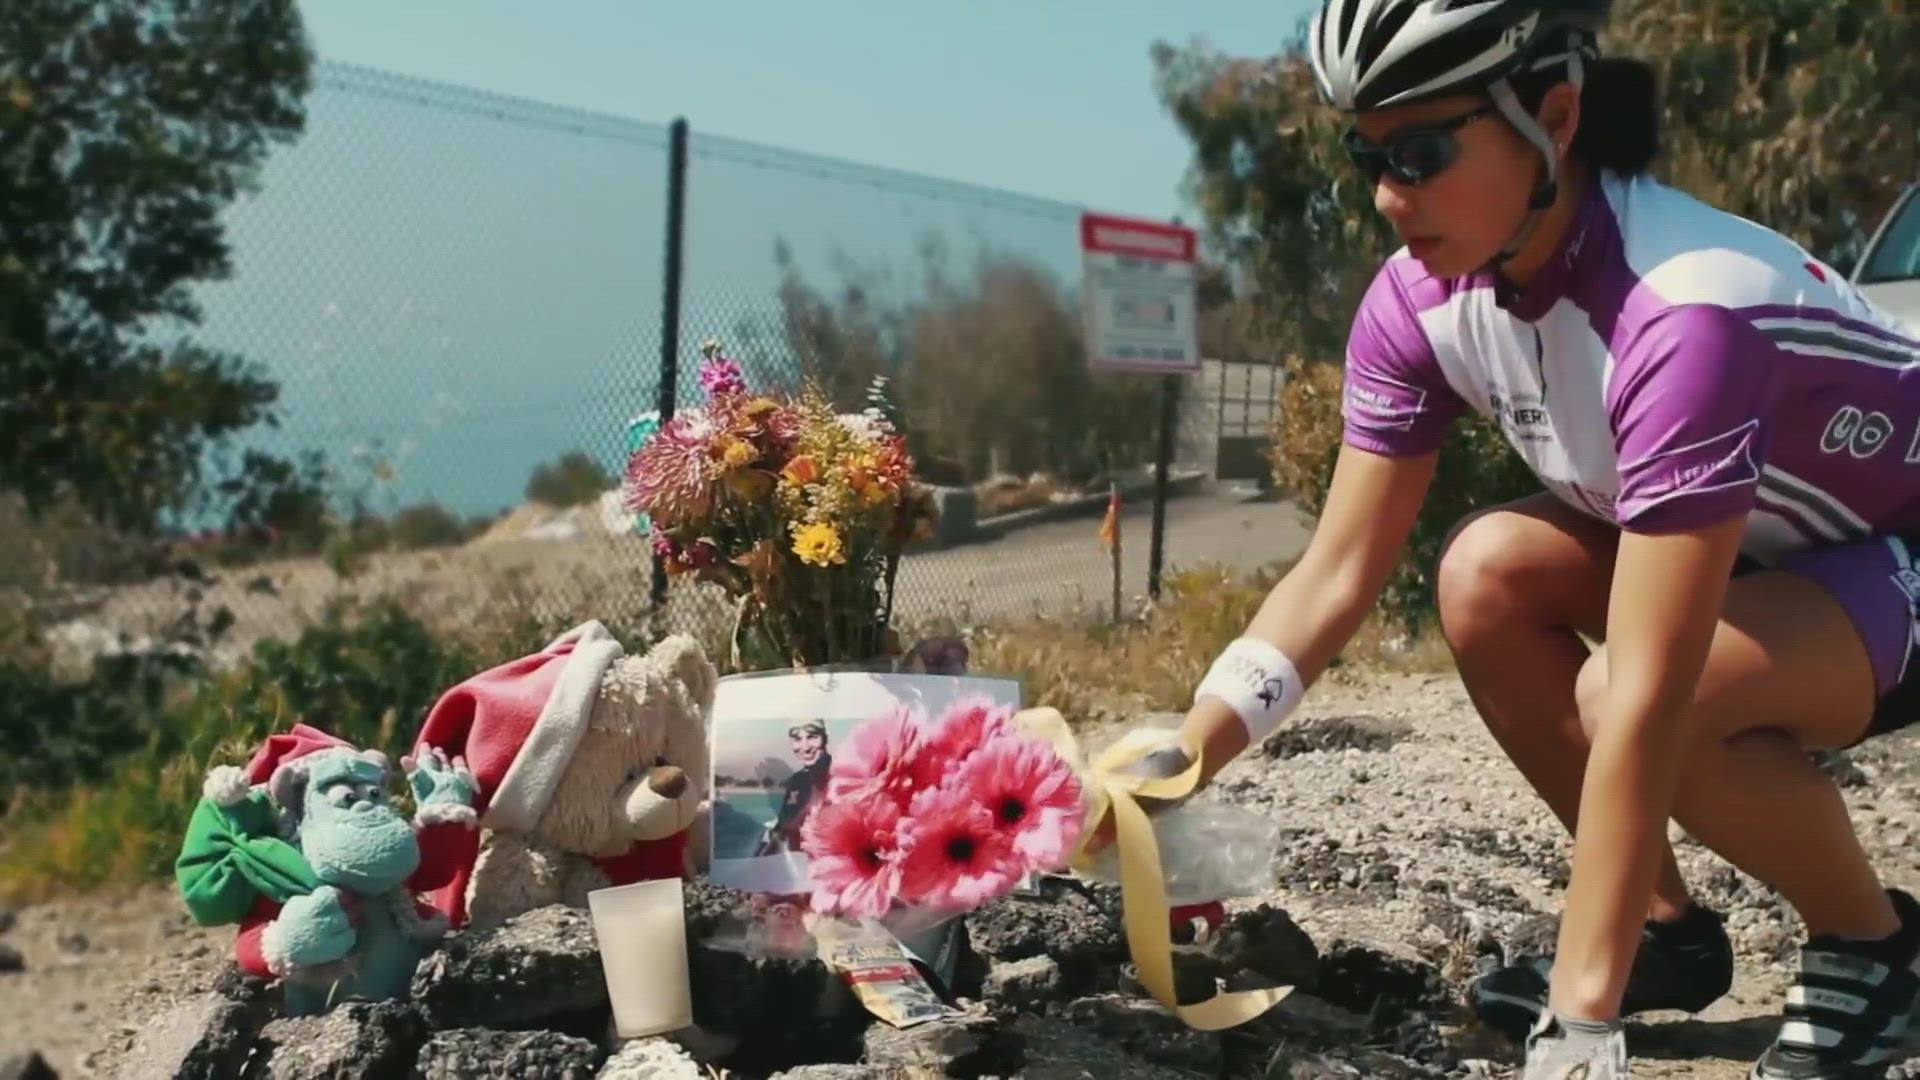 A new documentary "21 Miles in Malibu" explores the deadly stretch of Pacific Coast Highway.